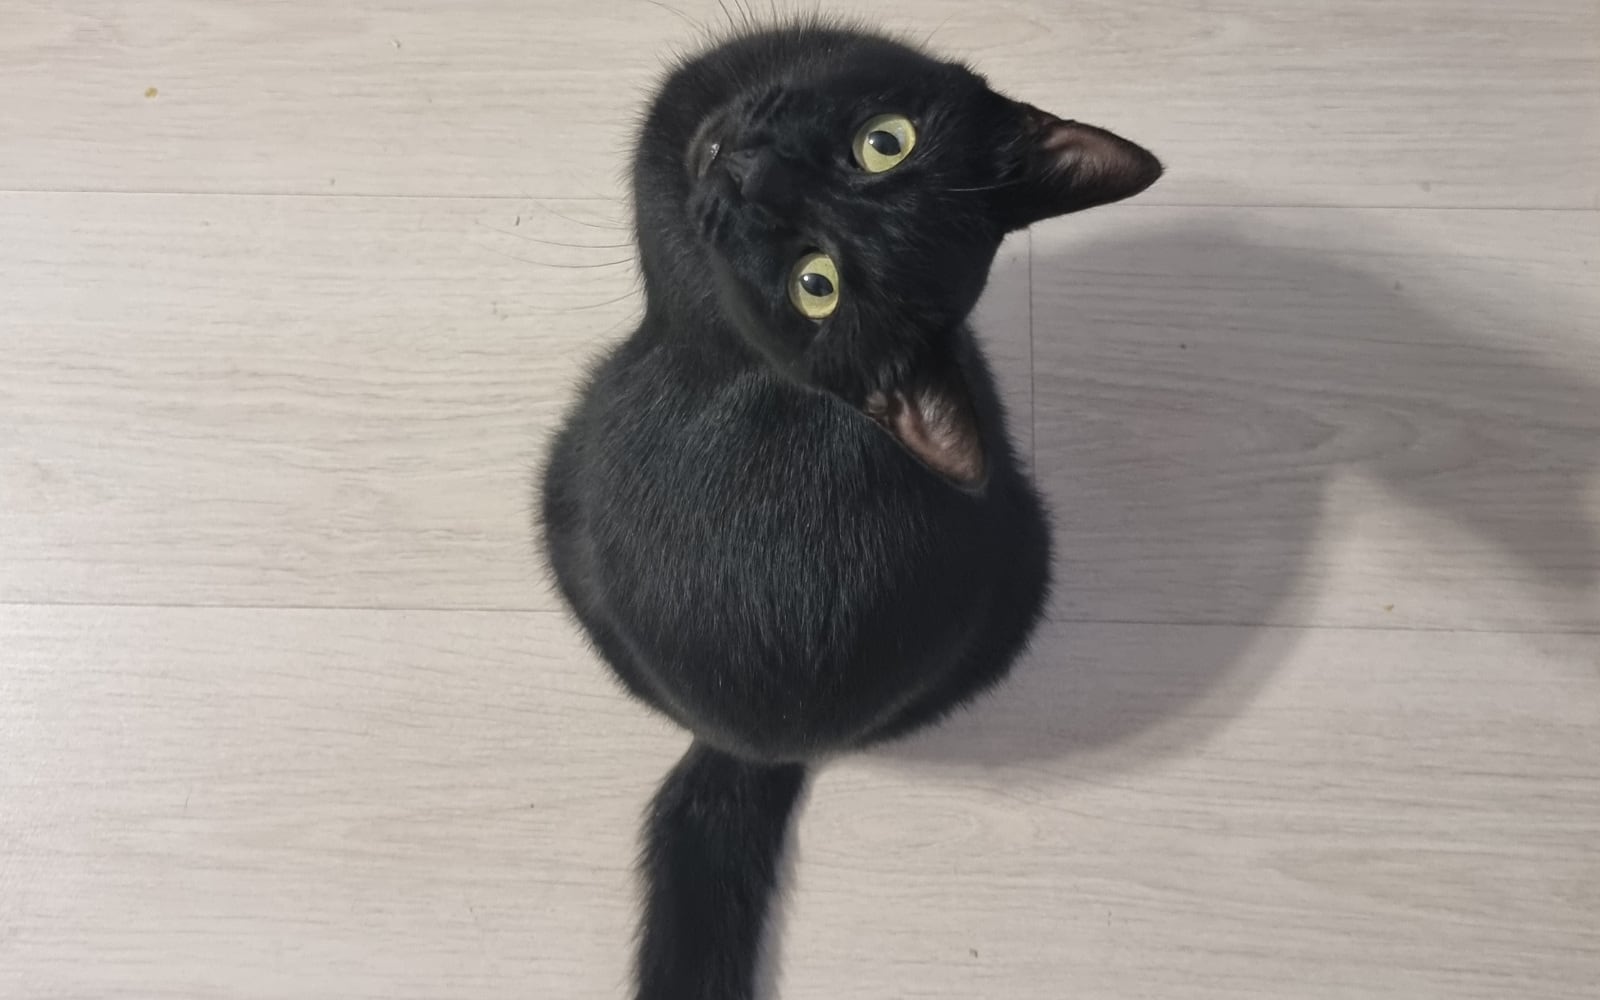 This is my cat, Zuzi. She's completely black with green eyes. A rescued girl. My sweetheart.
